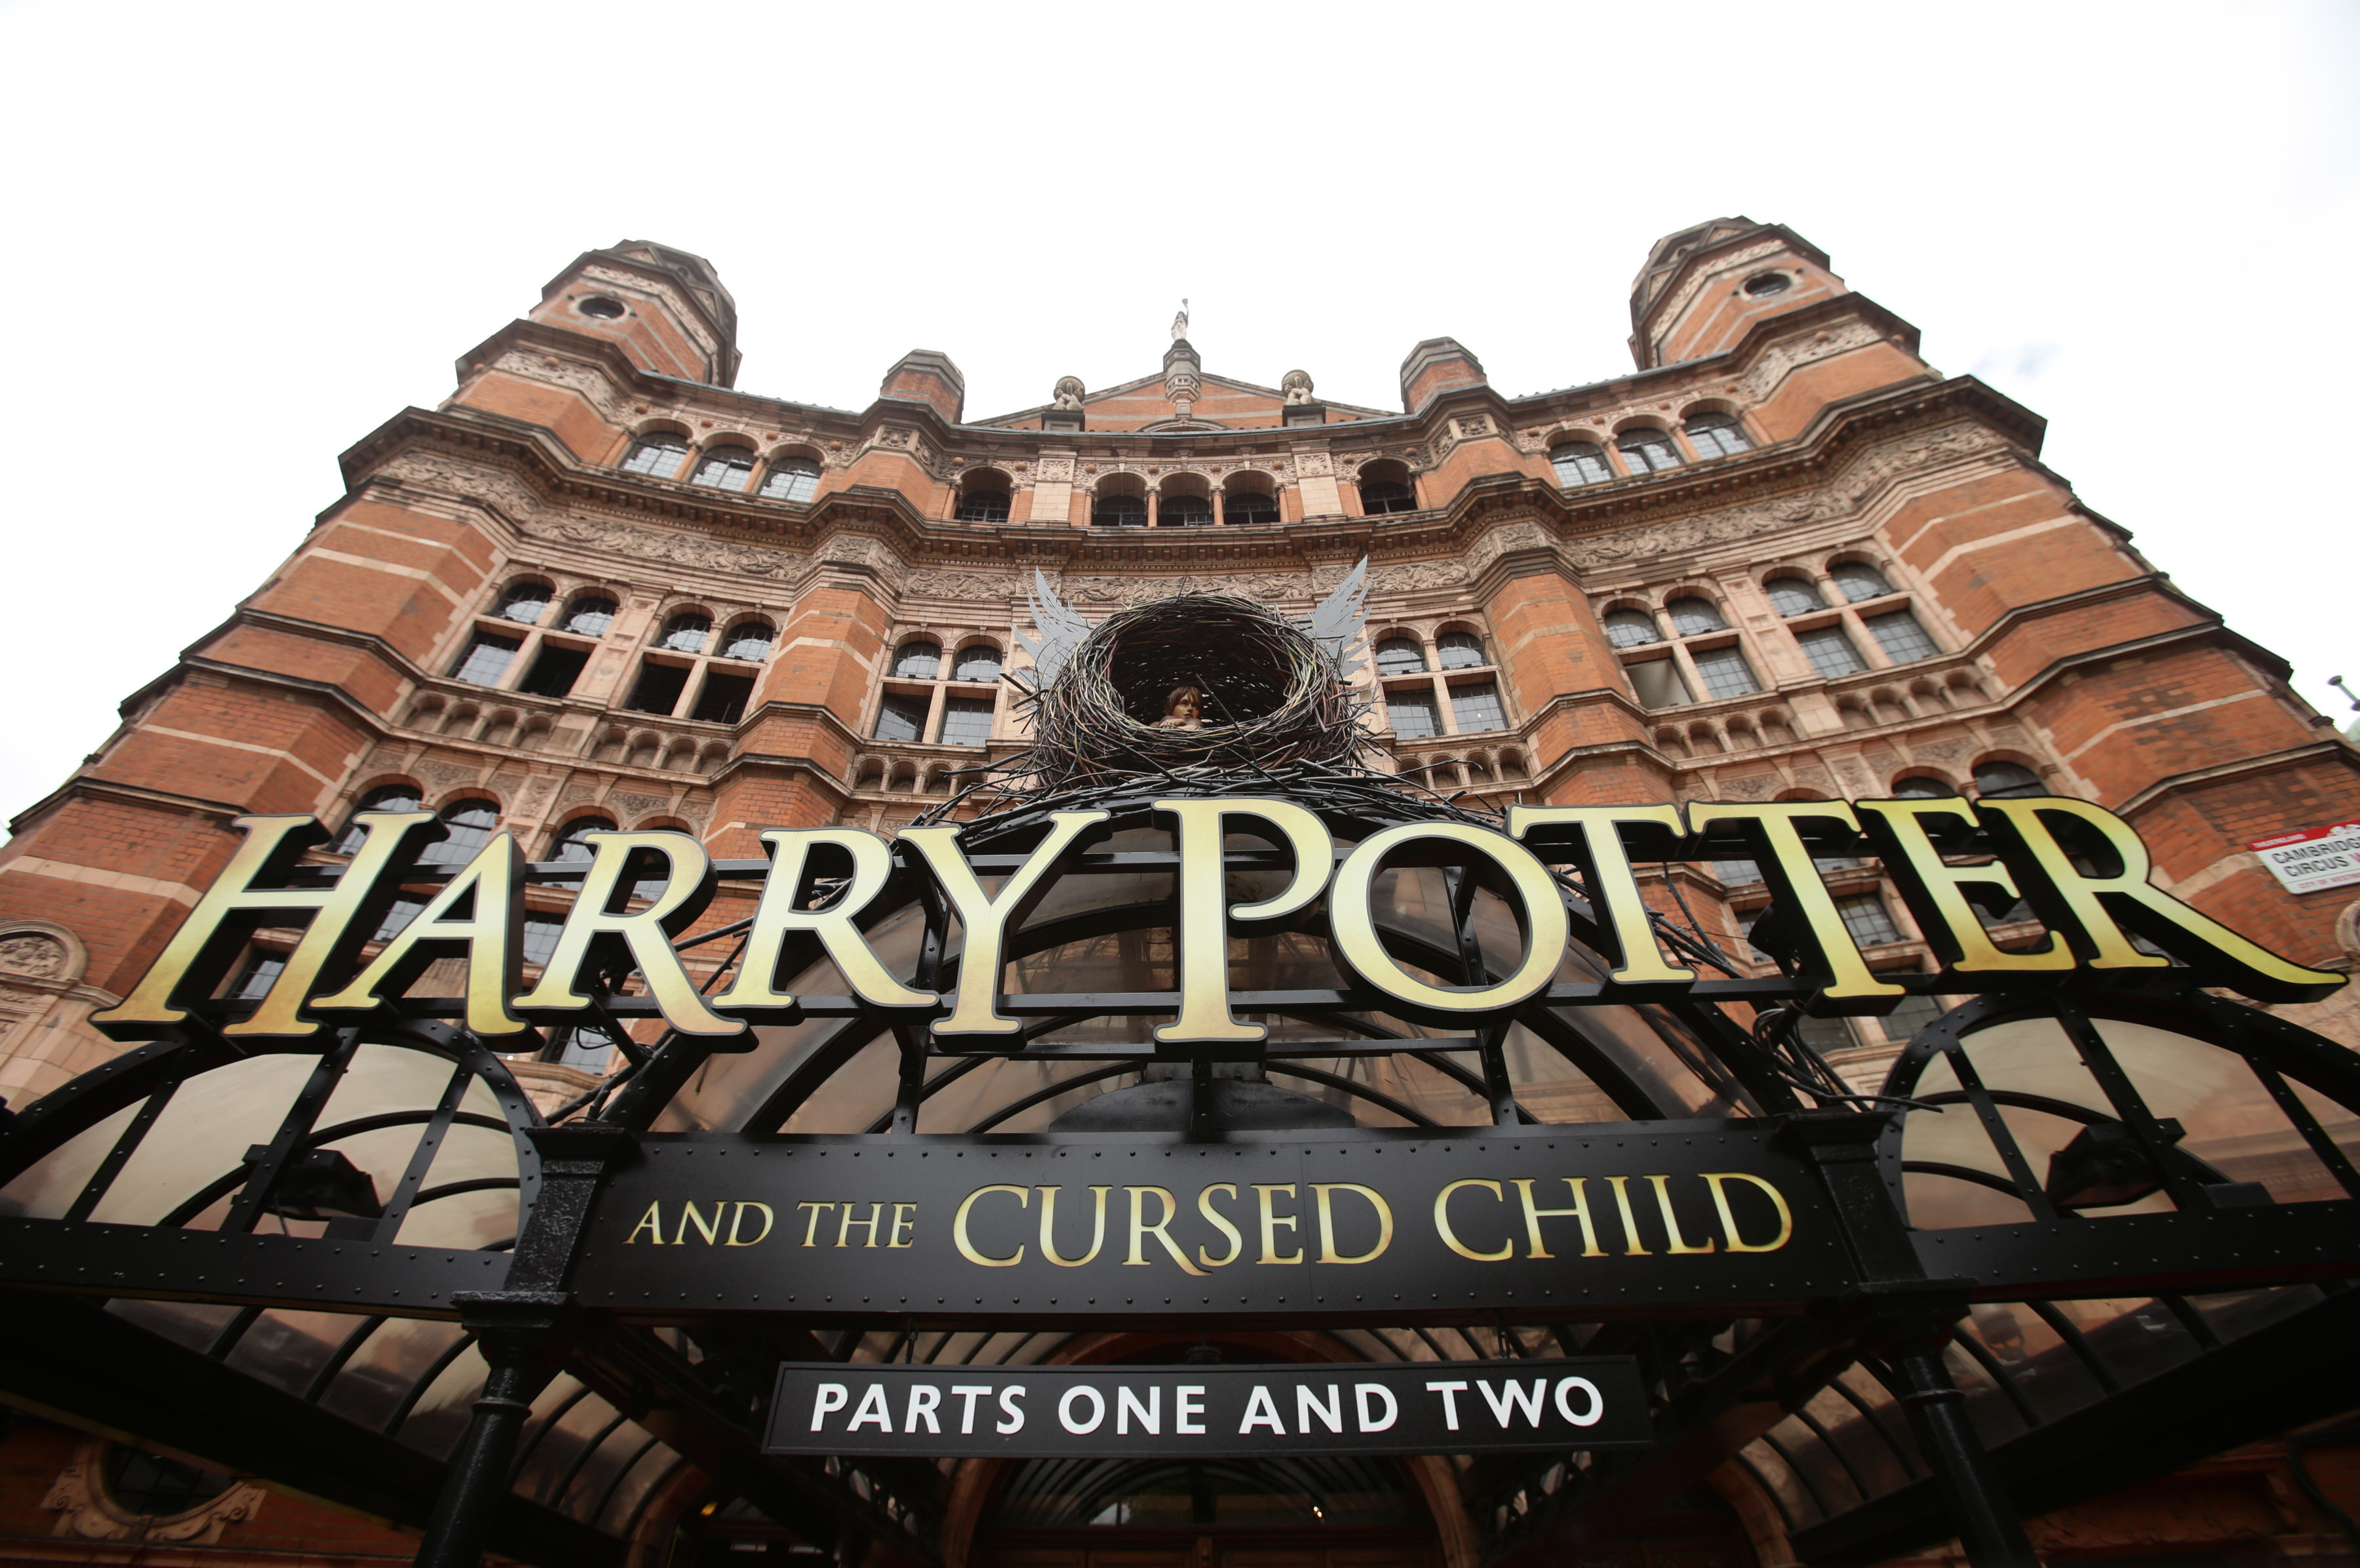 Harry Potter and The Cursed Child tickets